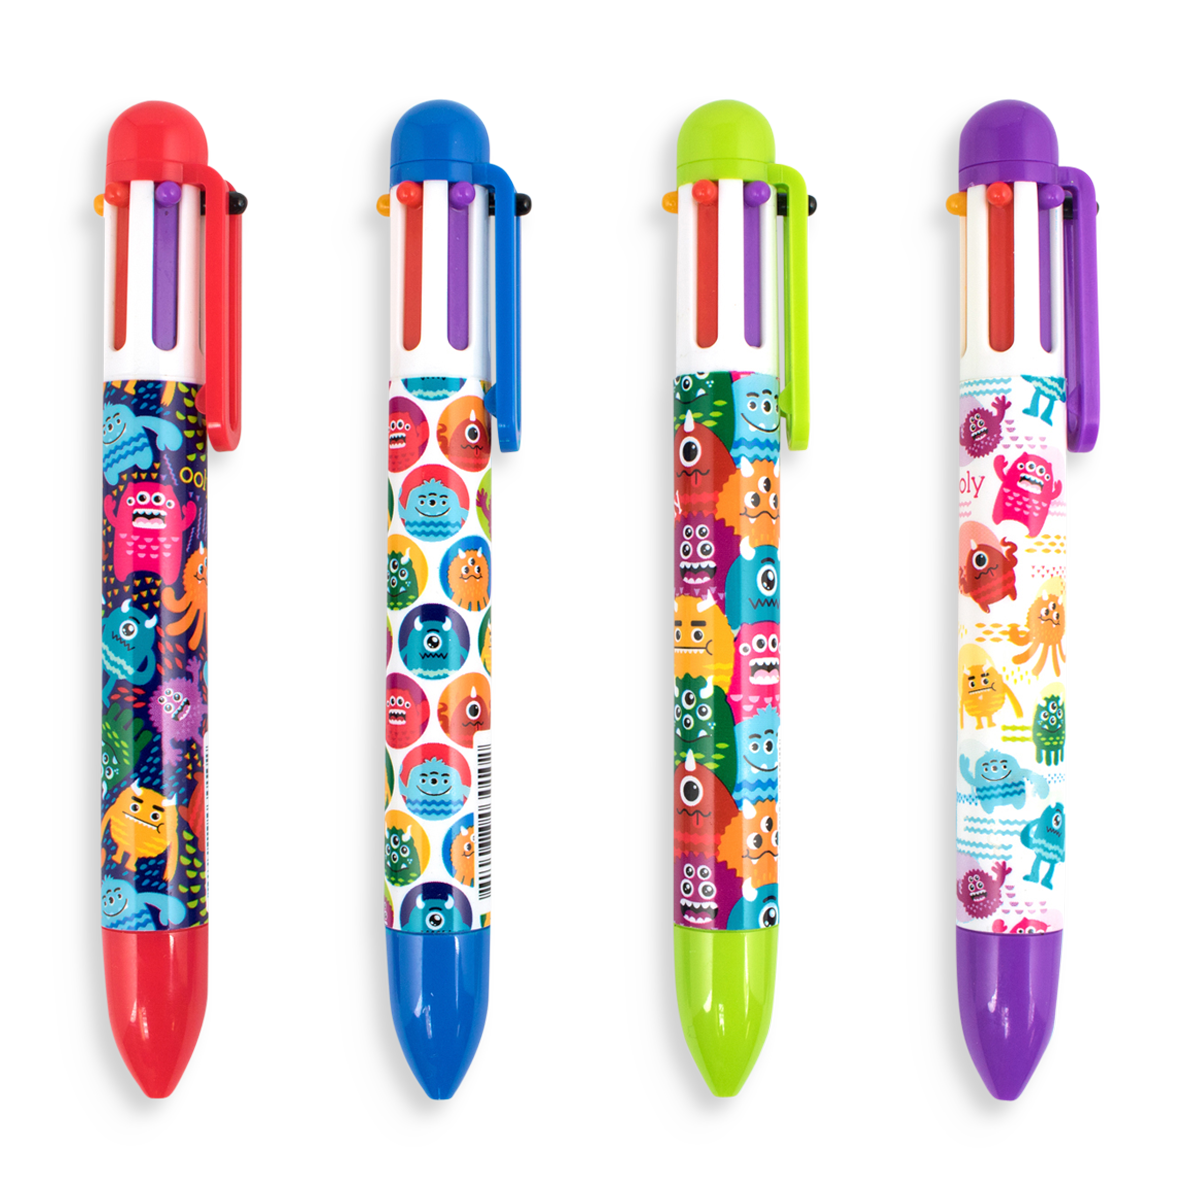 Bright Writers Colored Ink Retractable Ballpoint Pens - Set of 6